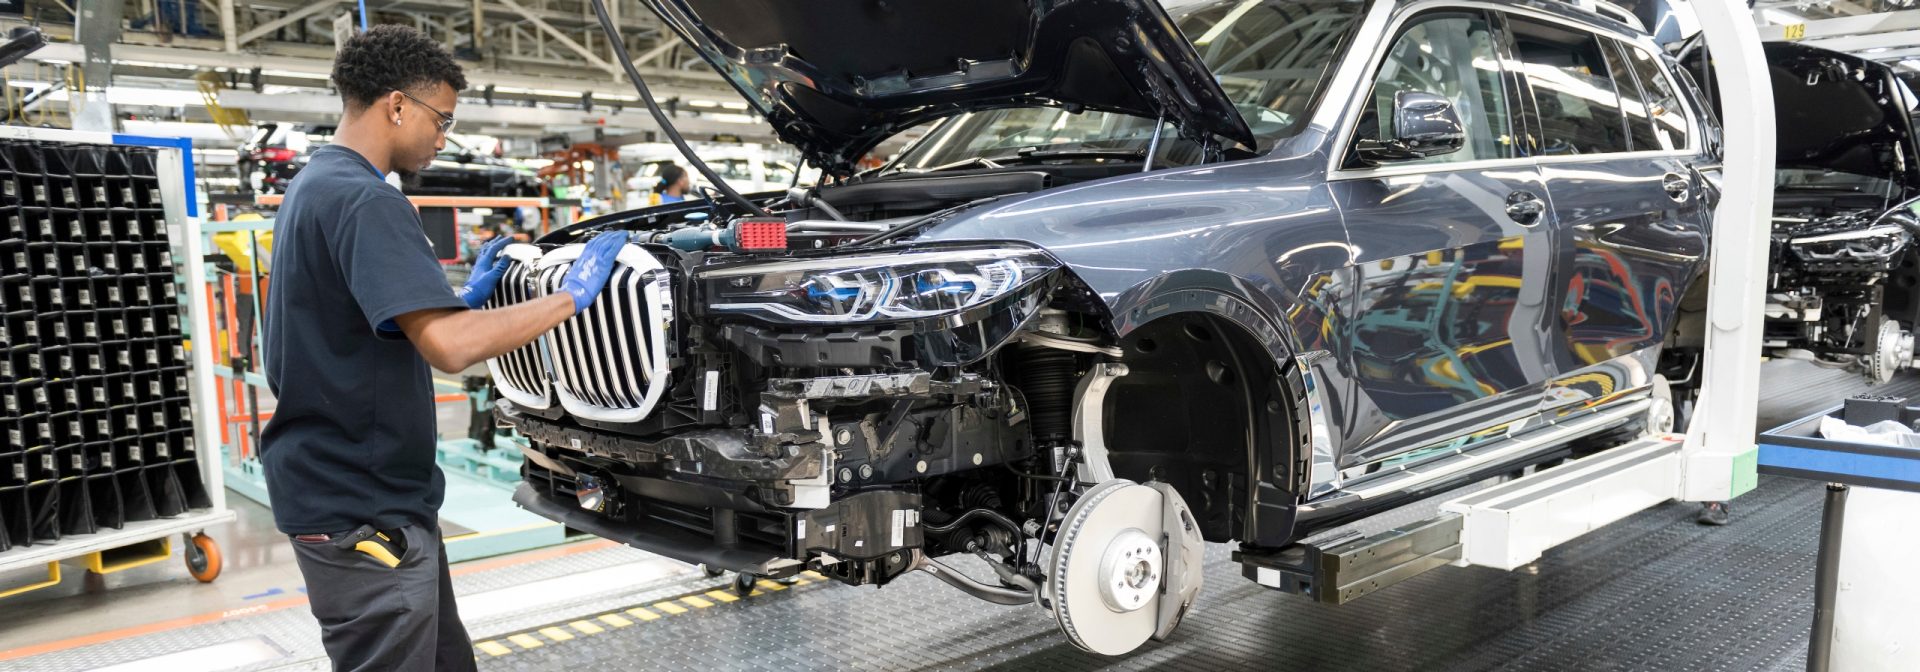 The first BMW X7 Sports Activity Vehicle on the assembly with an associate putting on the grille. 